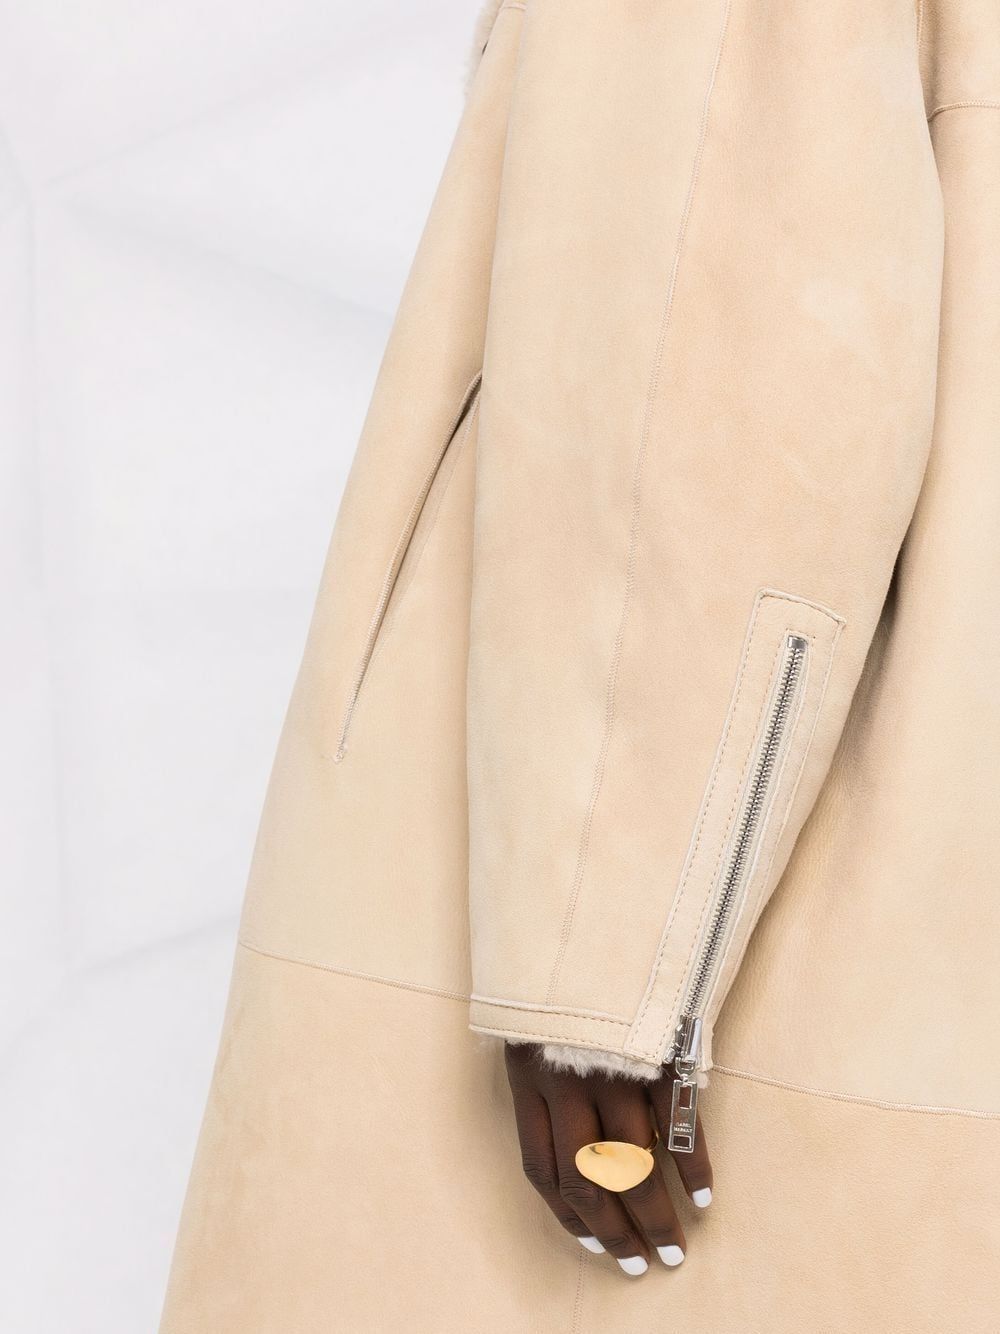 ISABEL MARANT Luxurious Beige Leather Coat - FW21 Collection